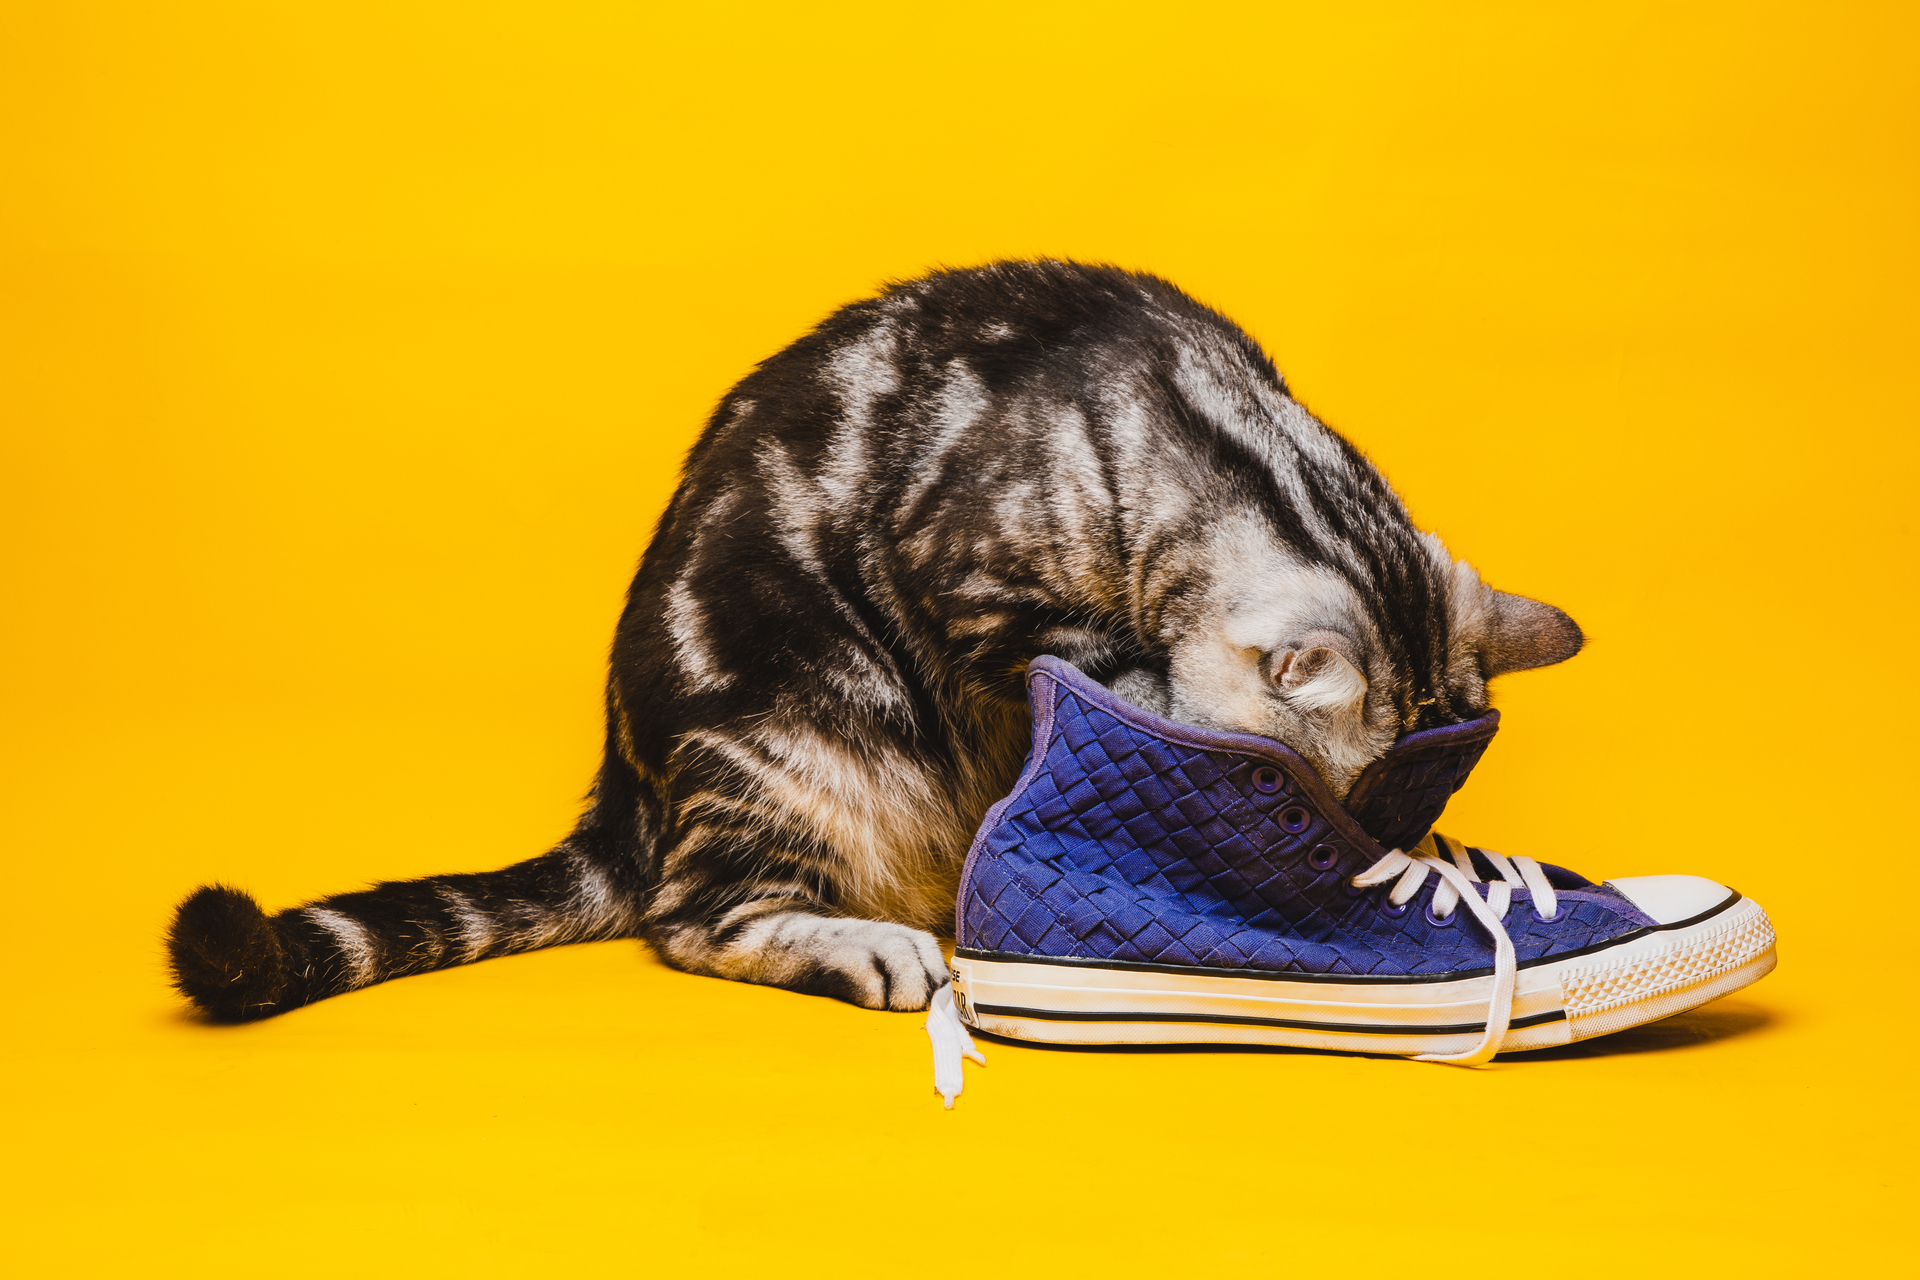 Stinking shoes: what can you do about it?